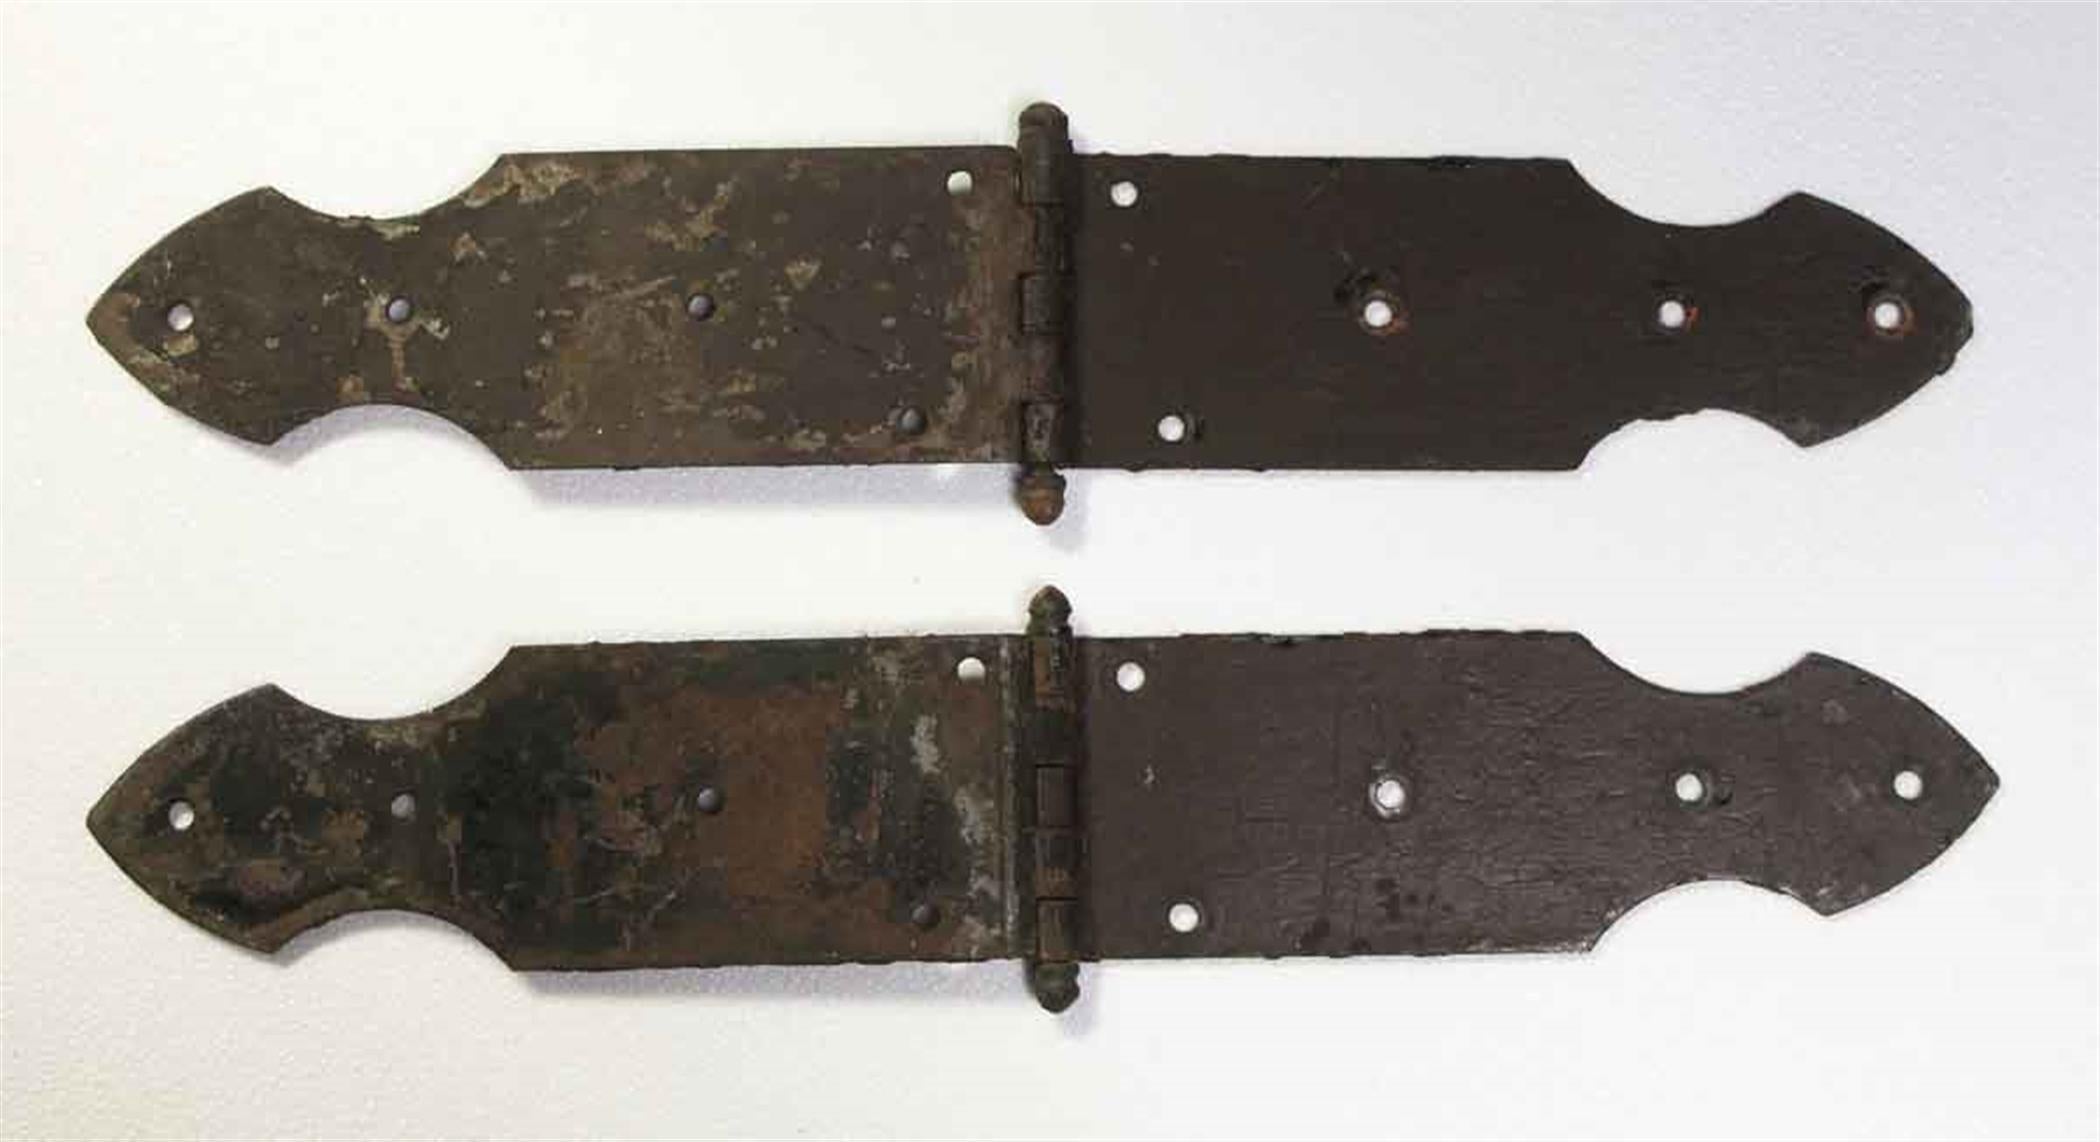 1940s cast iron strap door hinges with five knuckles. Some wear from age and use. Priced as a pair. Please note, this item is located in our Scranton, PA location.